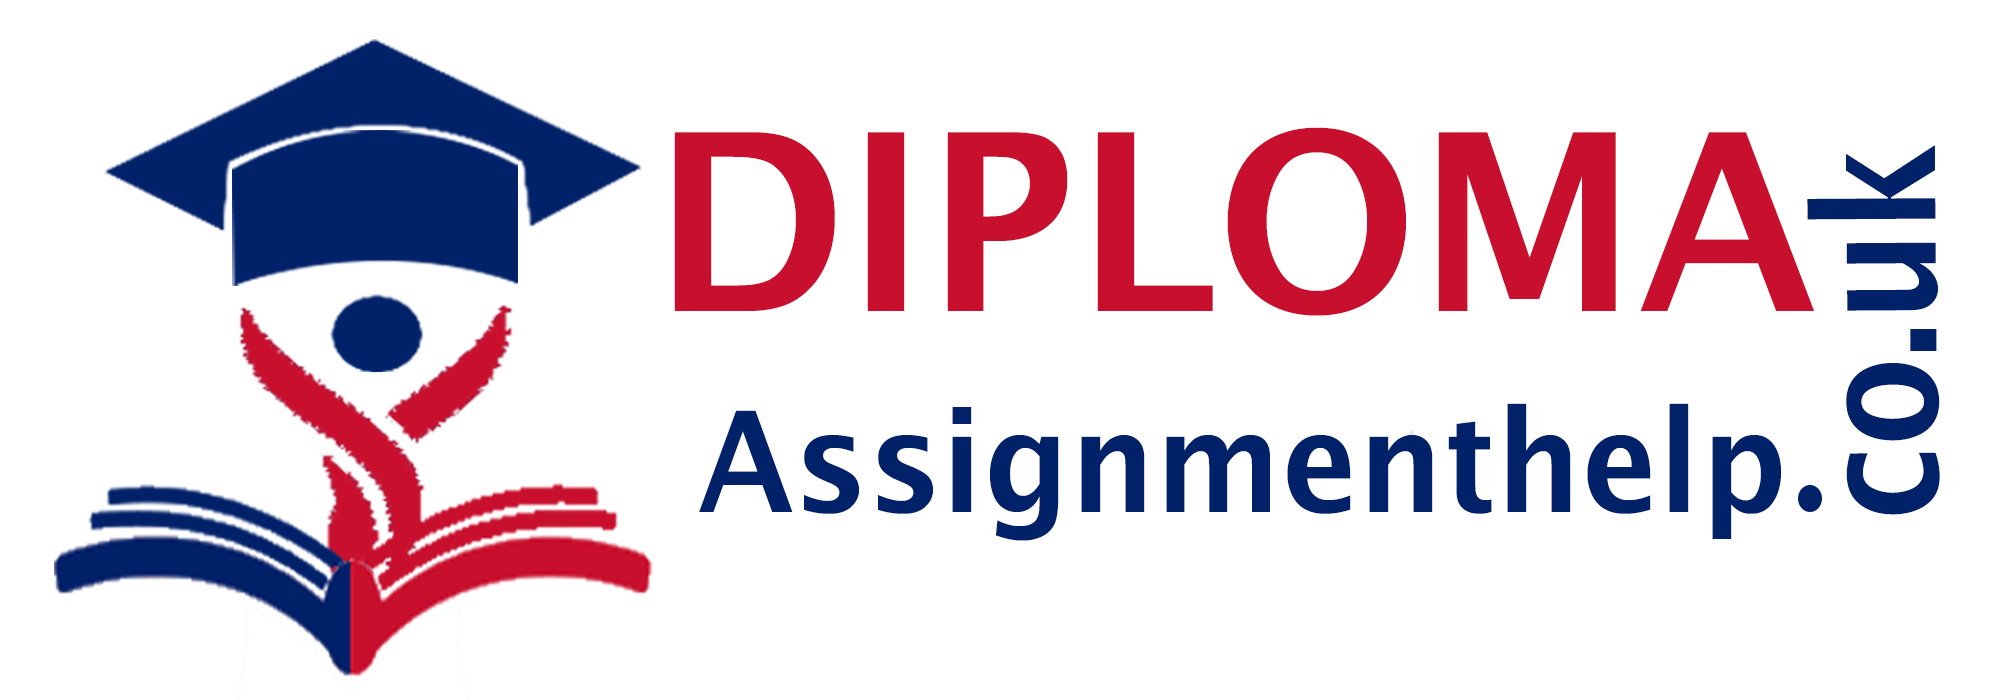 diploma assignment help